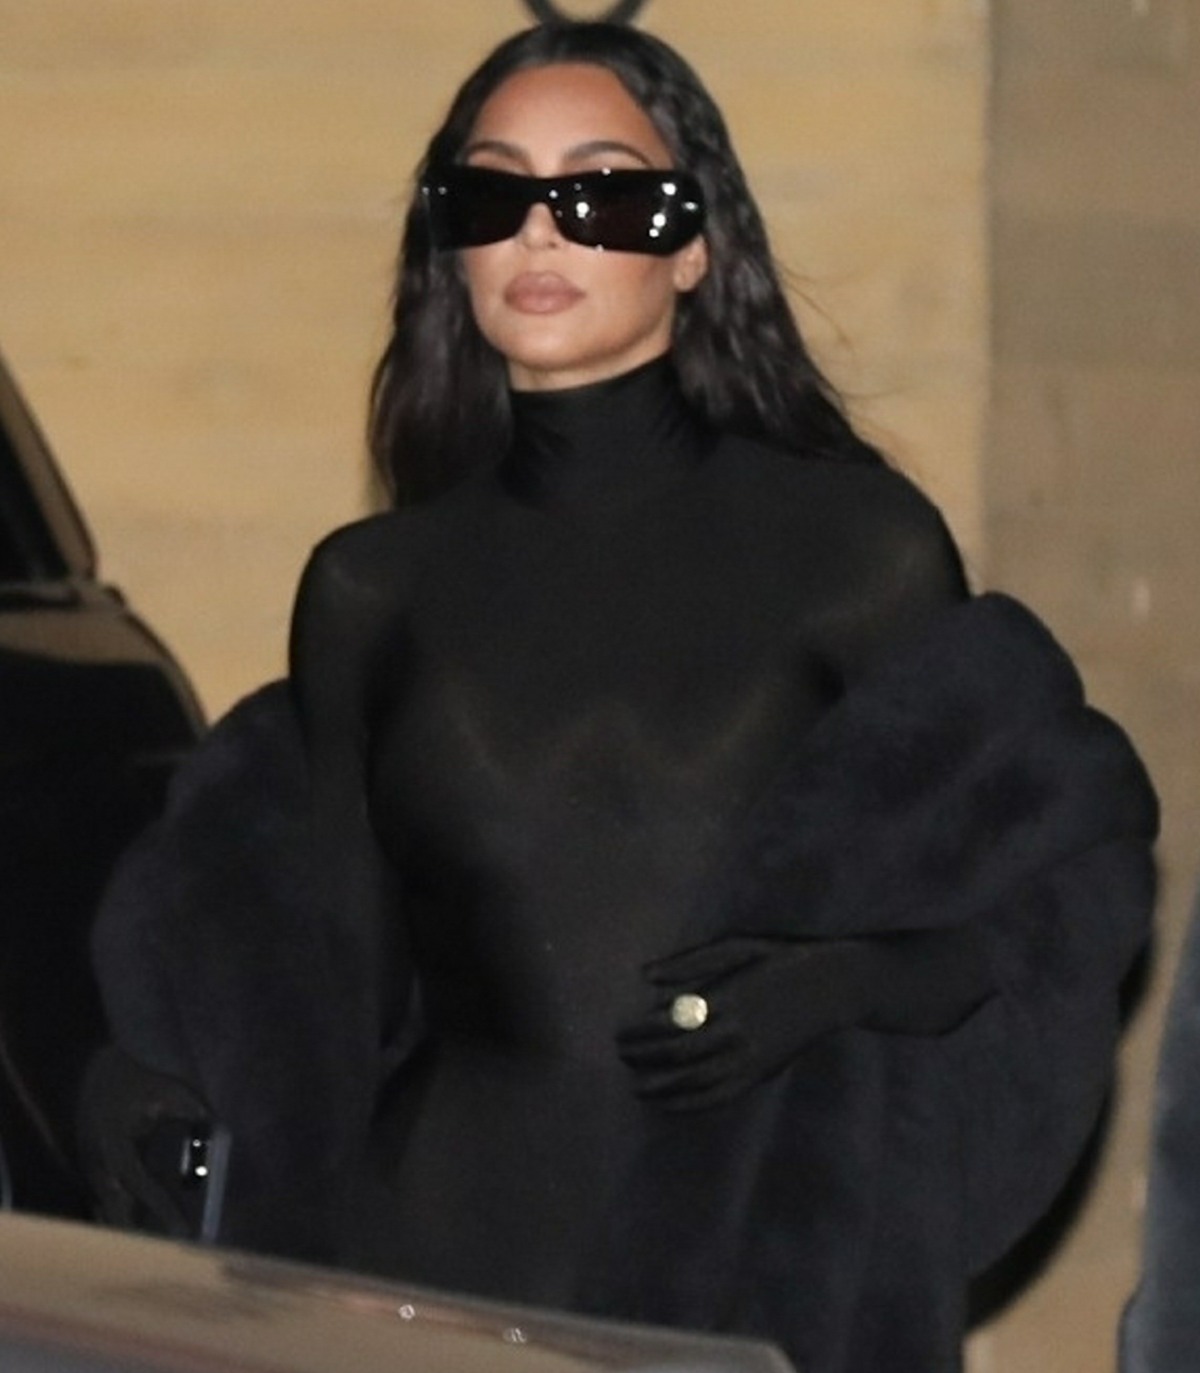 Kim Kardashian has dinner with her mother Kris Jenner and a friend at Nobu